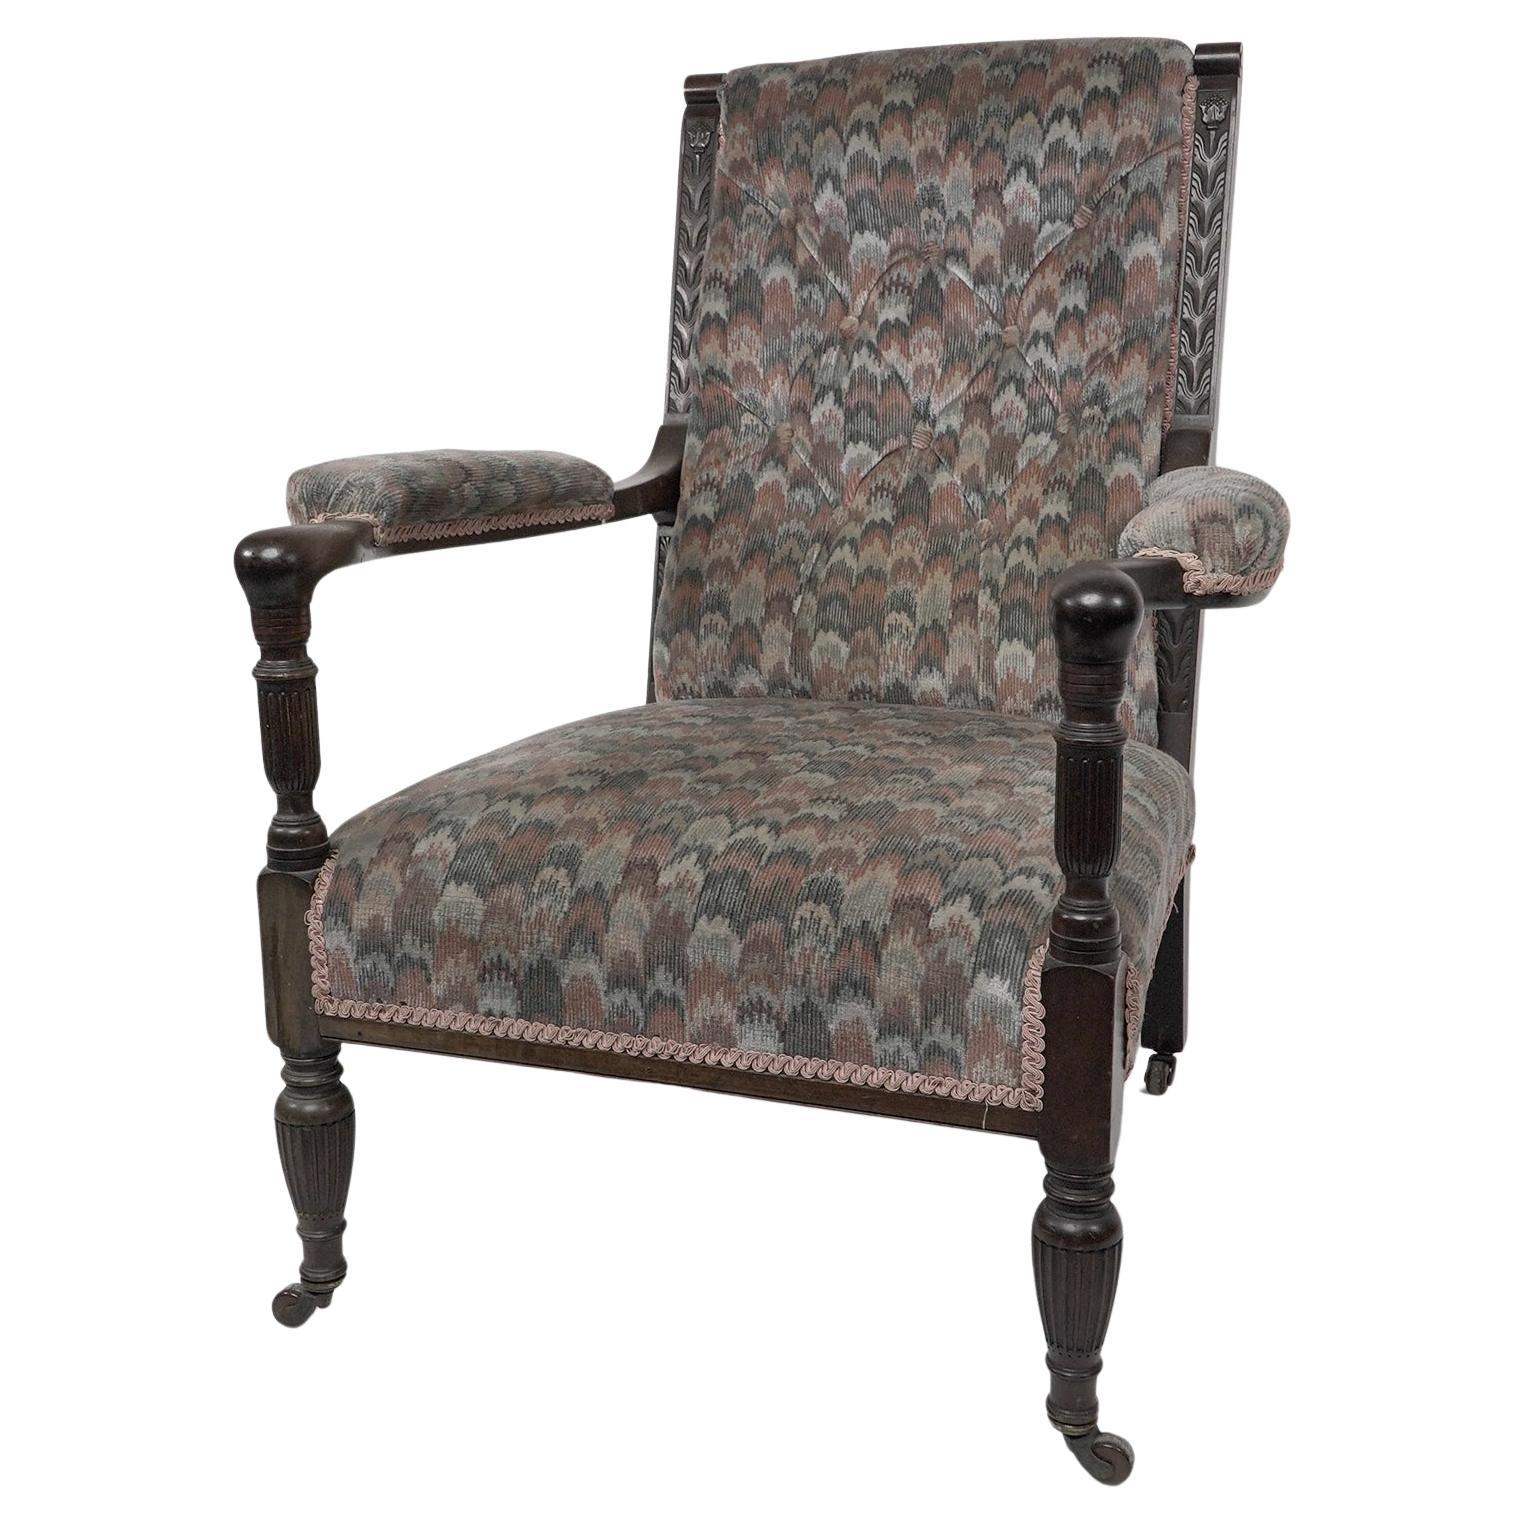 Henry William Batley (attributed) Jas. Shoolbred., a mahogany armchair, with stylised floral carved details to the back supports, the curved arms with elbow pads on fluted supports, and fluted legs on castors.